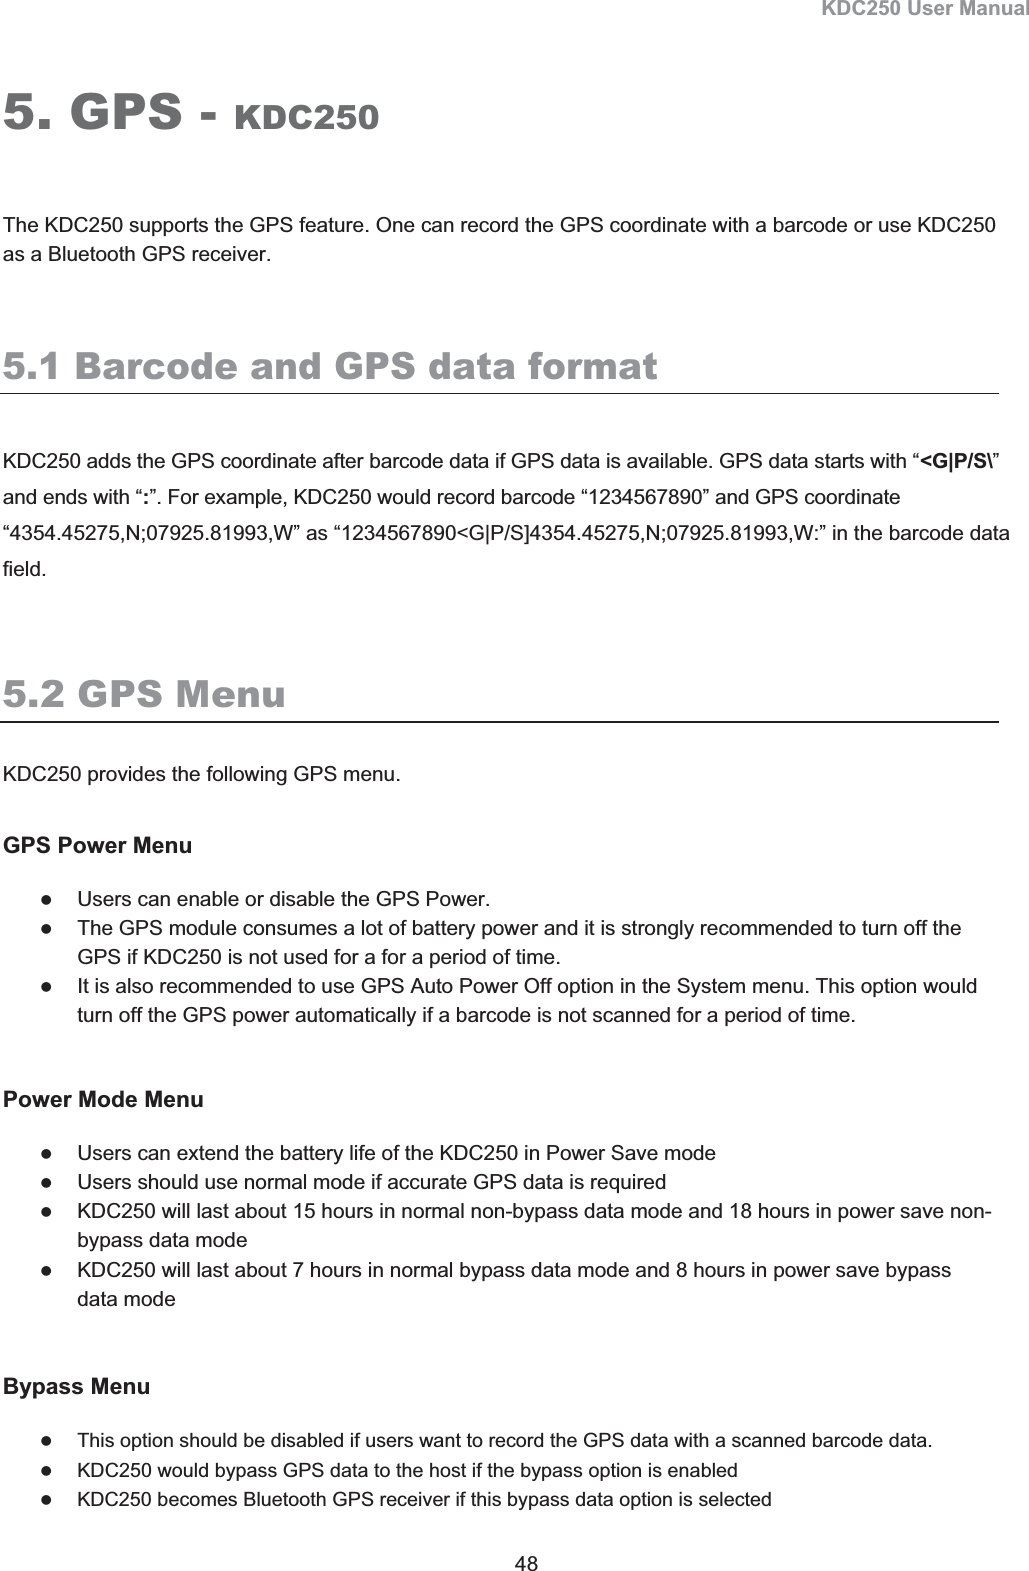 KDC250 User Manual 48 5. GPS - KDC250The KDC250 supports the GPS feature. One can record the GPS coordinate with a barcode or use KDC250 as a Bluetooth GPS receiver. 5.1 Barcode and GPS data format KDC250 adds the GPS coordinate after barcode data if GPS data is available. GPS data starts with “&lt;G|P/S\”and ends with “:”. For example, KDC250 would record barcode “1234567890” and GPS coordinate “4354.45275,N;07925.81993,W” as “1234567890&lt;G|P/S]4354.45275,N;07925.81993,W:” in the barcode data field.5.2 GPS MenuKDC250 provides the following GPS menu. GPS Power Menu zUsers can enable or disable the GPS Power.  zThe GPS module consumes a lot of battery power and it is strongly recommended to turn off the GPS if KDC250 is not used for a for a period of time. zIt is also recommended to use GPS Auto Power Off option in the System menu. This option would turn off the GPS power automatically if a barcode is not scanned for a period of time. Power Mode Menu zUsers can extend the battery life of the KDC250 in Power Save mode zUsers should use normal mode if accurate GPS data is required zKDC250 will last about 15 hours in normal non-bypass data mode and 18 hours in power save non-bypass data mode zKDC250 will last about 7 hours in normal bypass data mode and 8 hours in power save bypass data mode  Bypass Menu zThis option should be disabled if users want to record the GPS data with a scanned barcode data. zKDC250 would bypass GPS data to the host if the bypass option is enabled zKDC250 becomes Bluetooth GPS receiver if this bypass data option is selected 